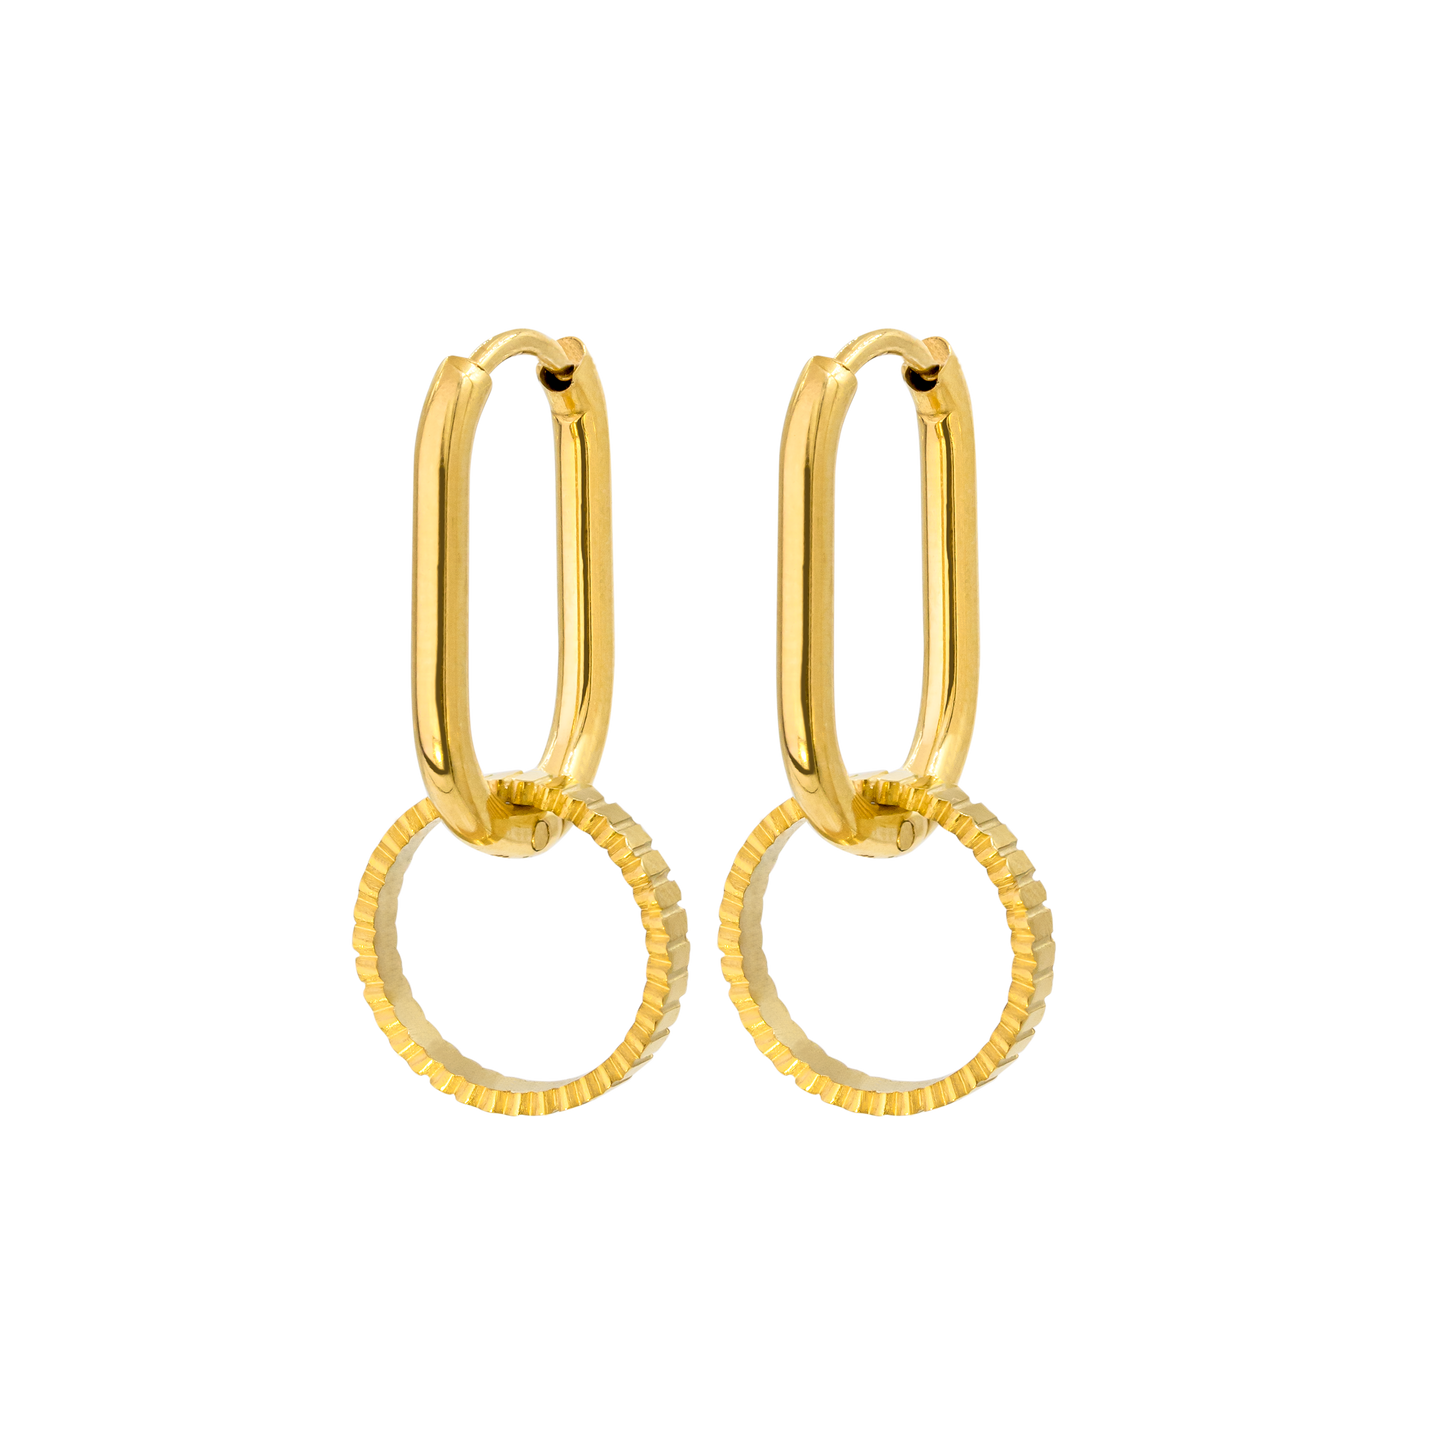 Oval Hoops and Stripes Oro